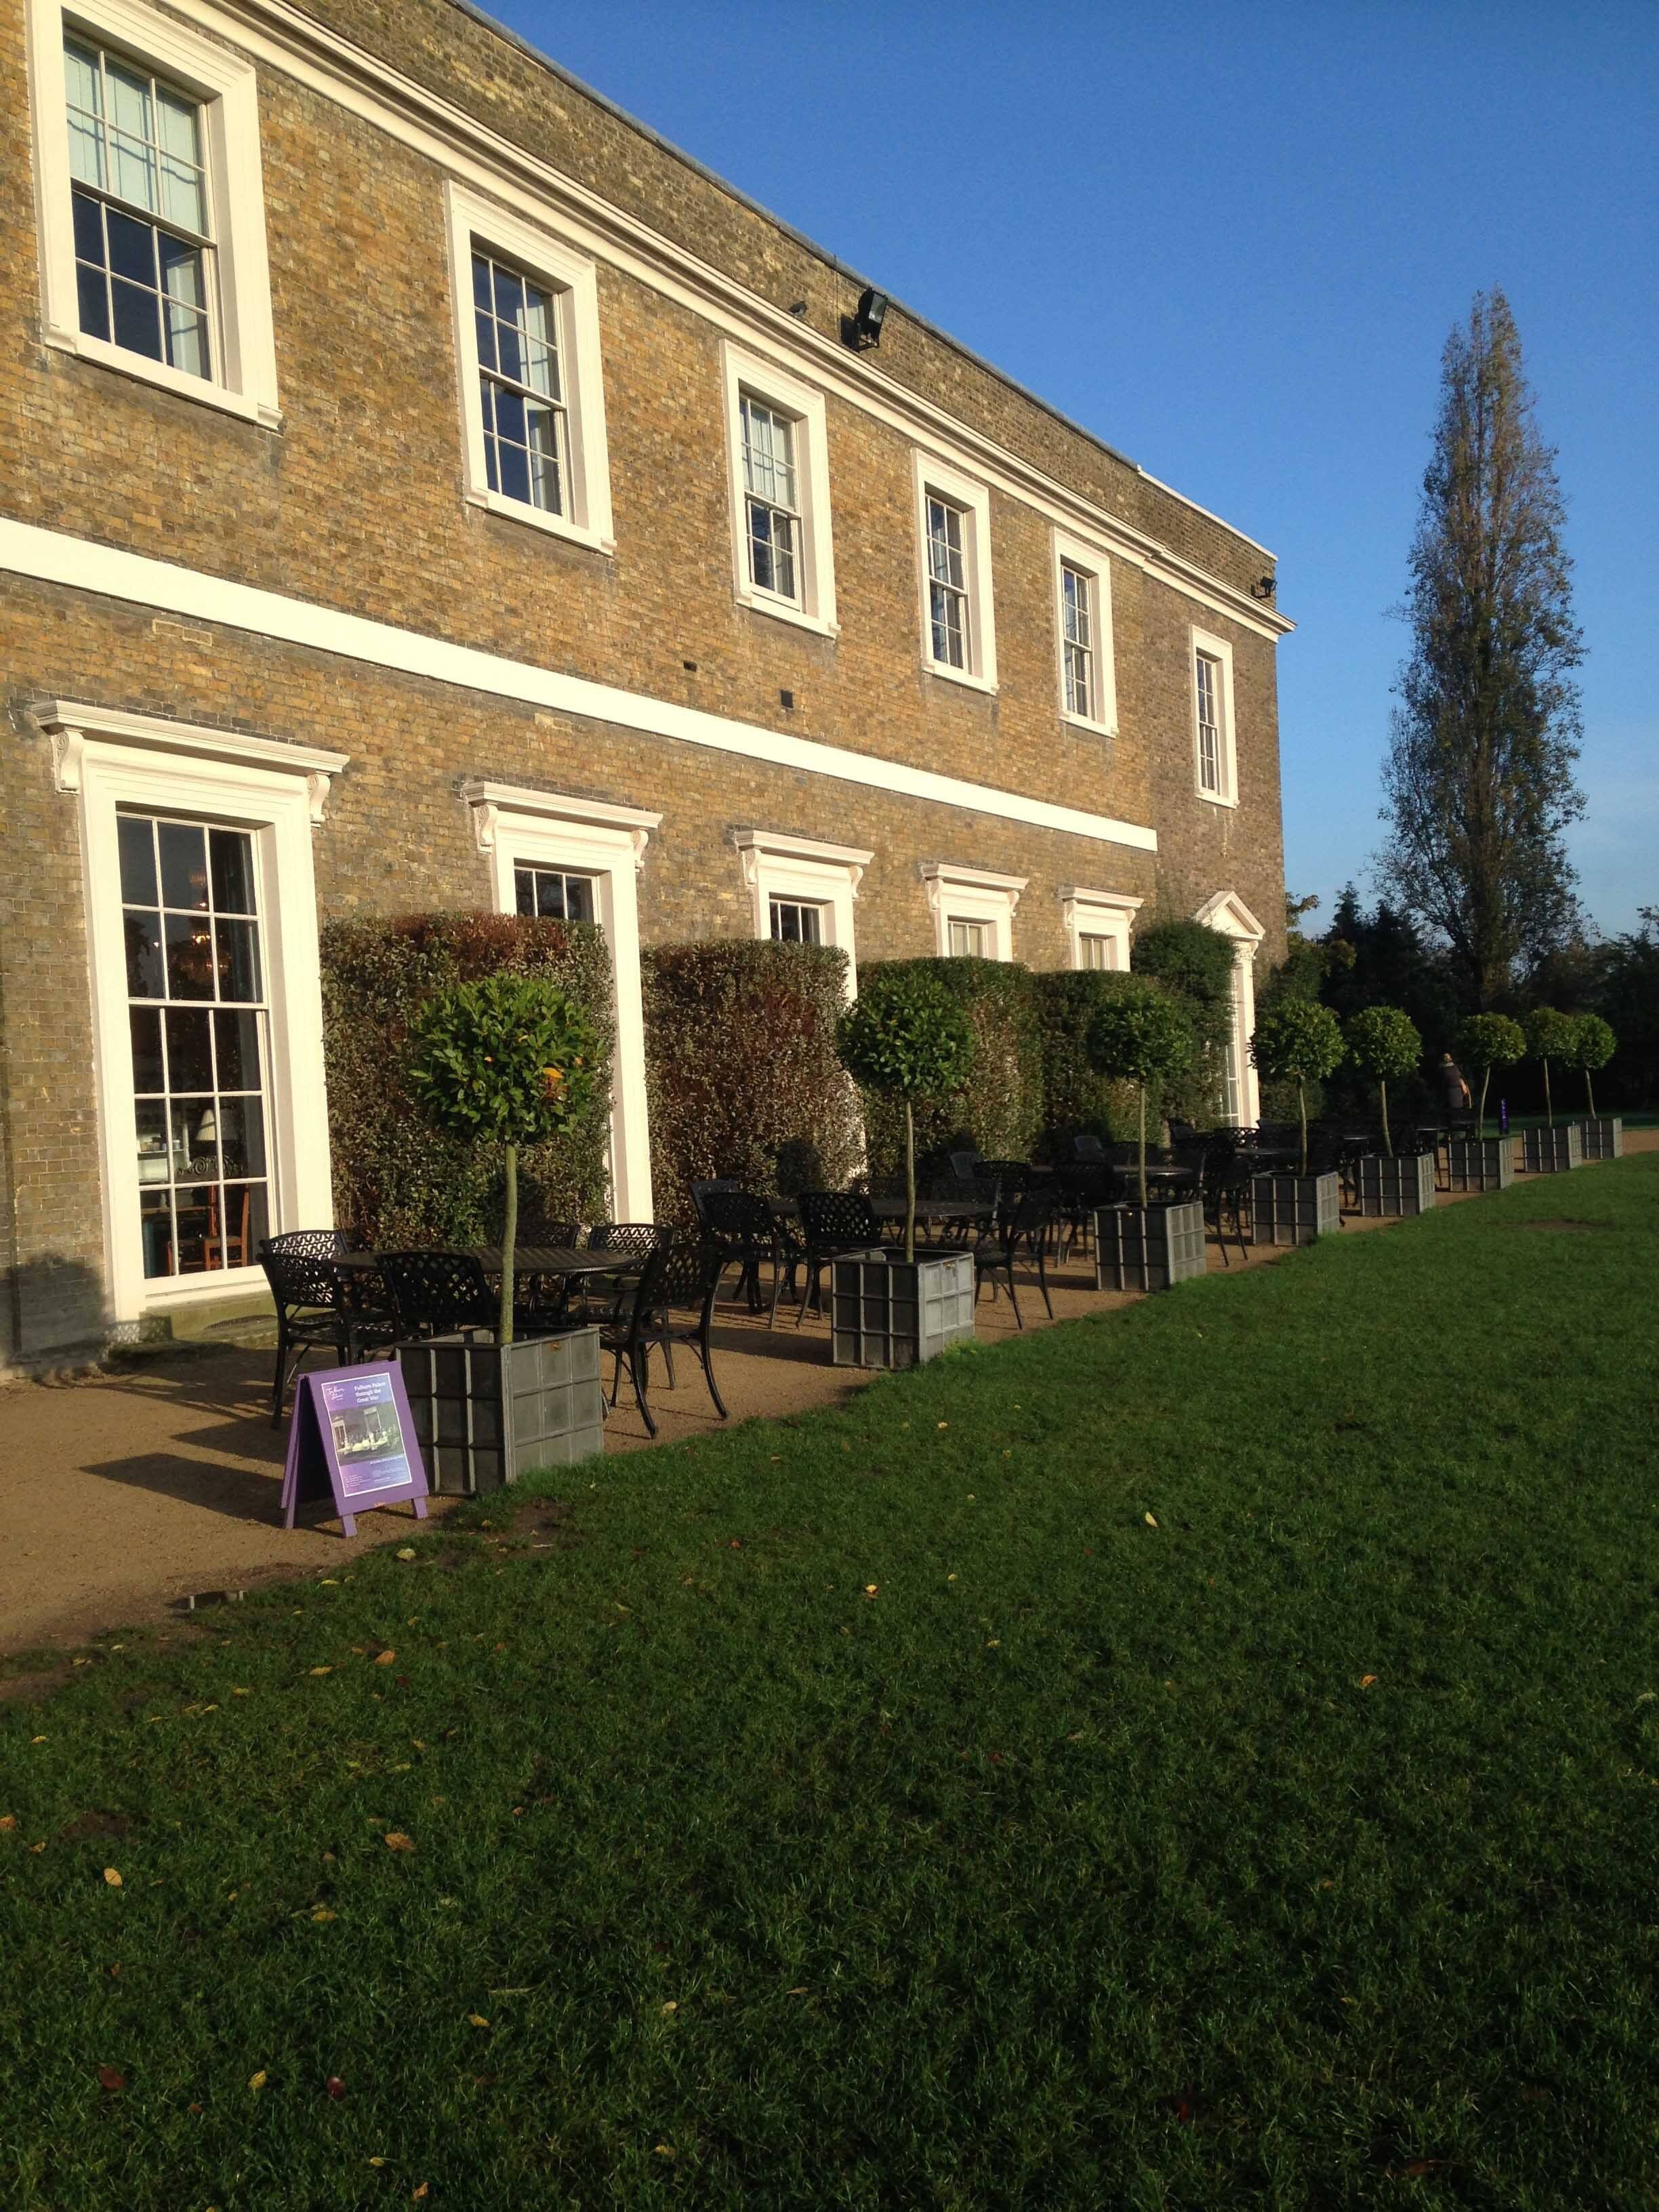 The Drawing Room Cafe - Fulham Palace | Bishops Avenue, London SW6 6EA | +44 20 7736 3233